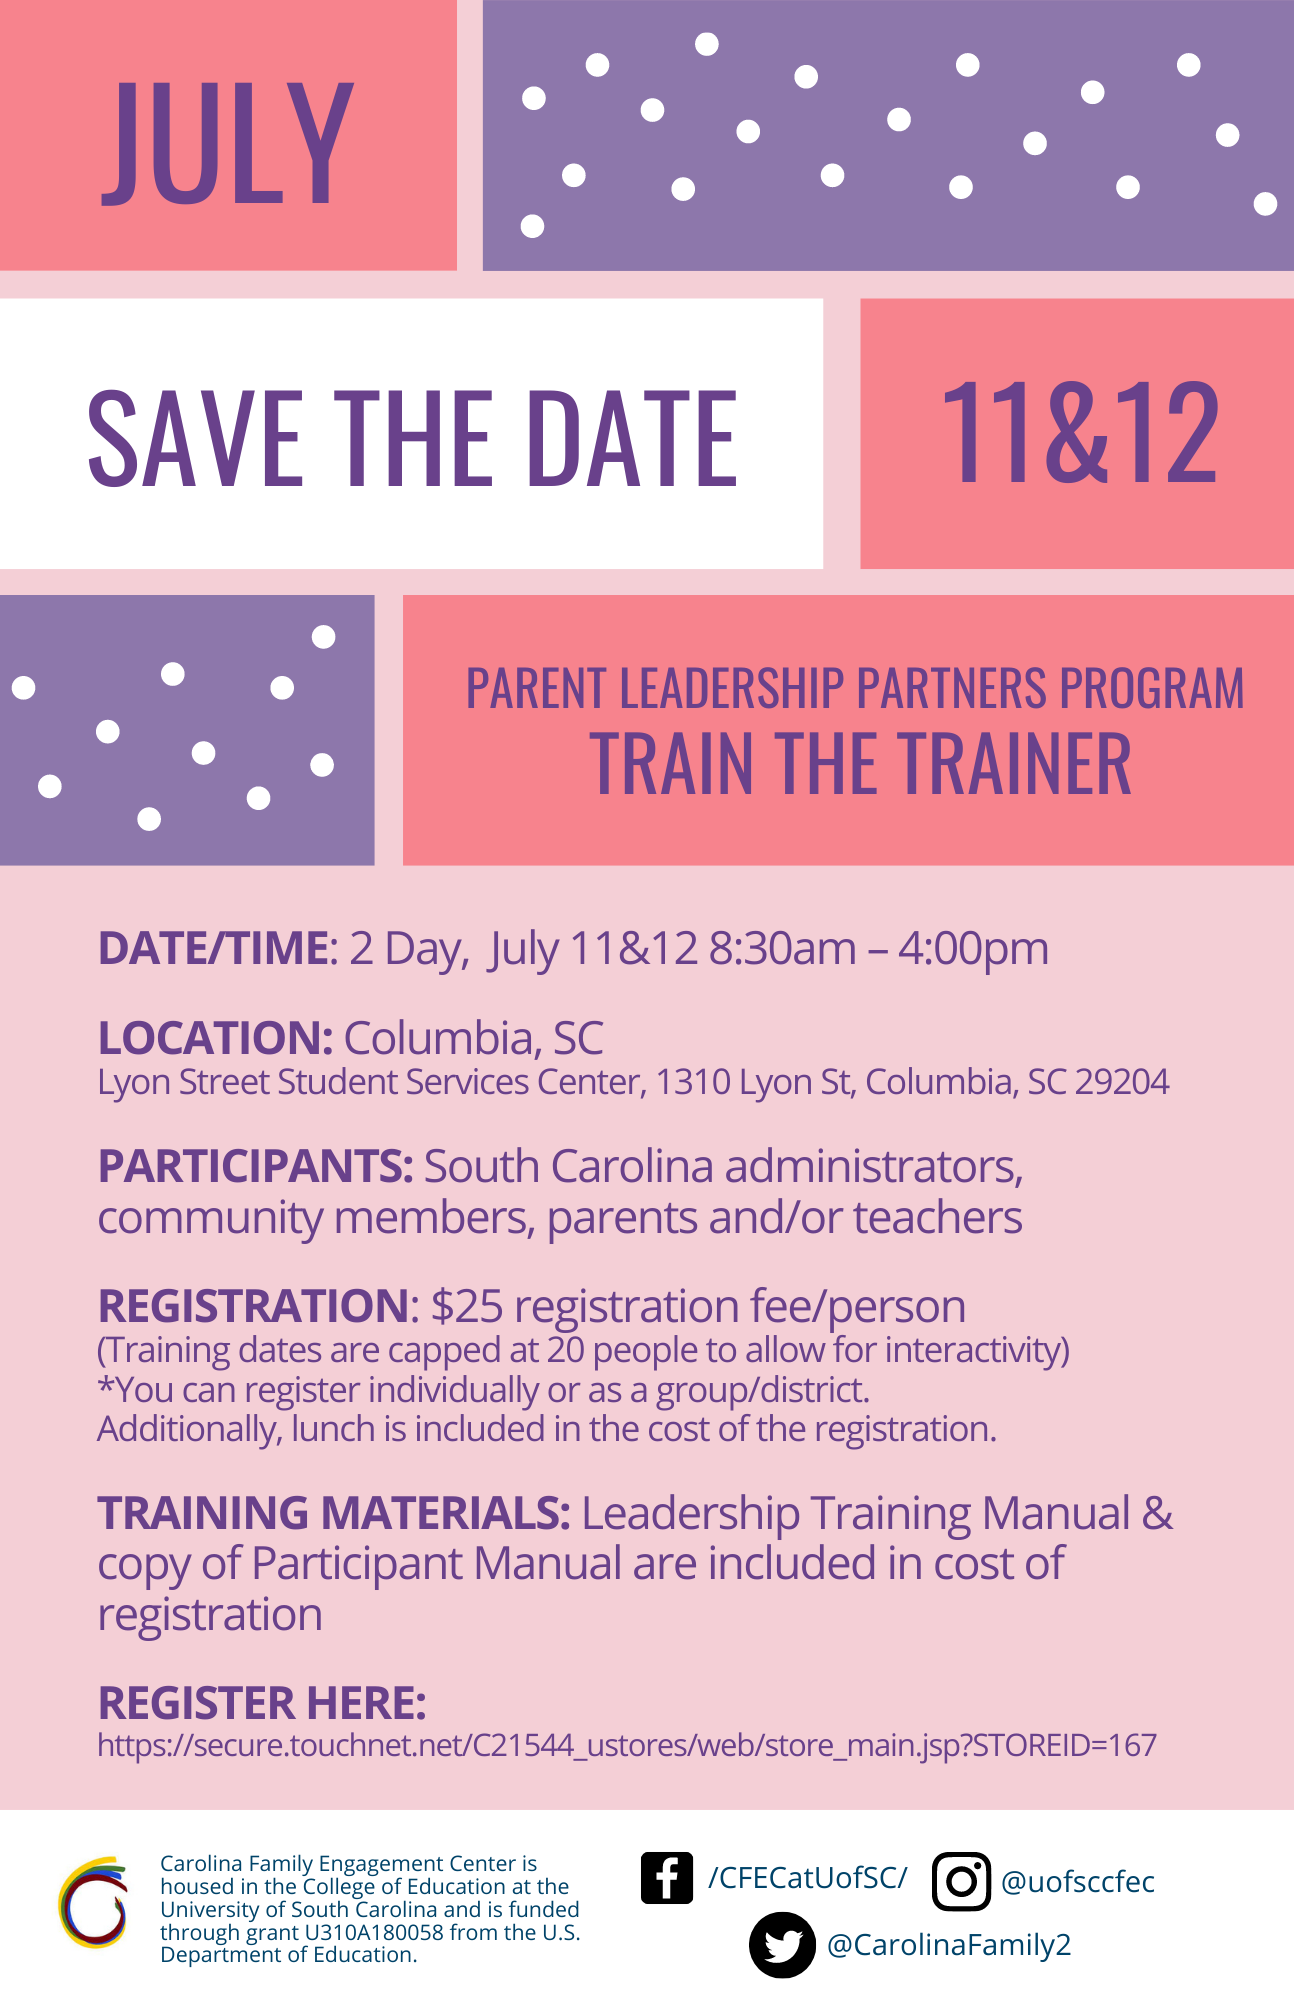 PLP Train the Trainer Flyer